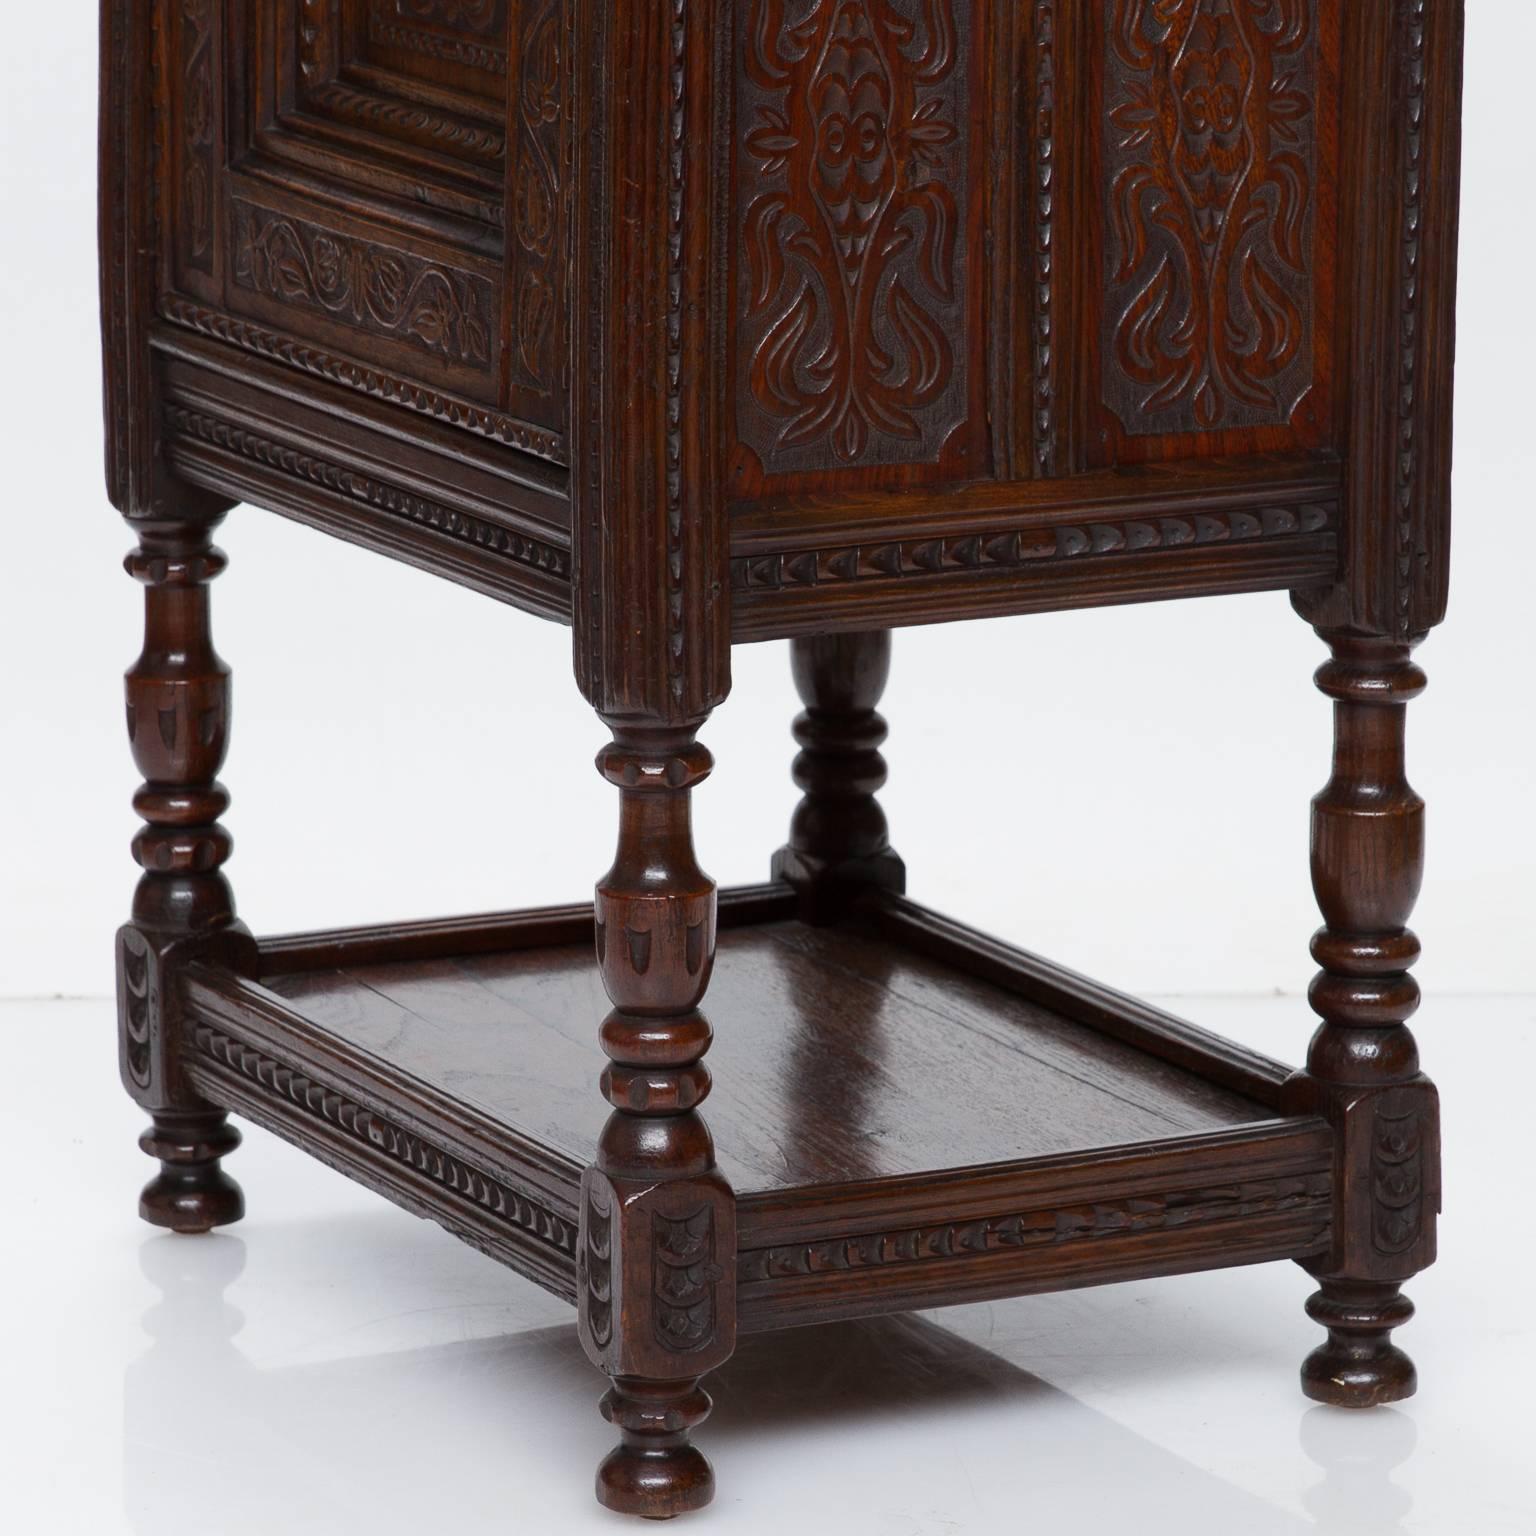 Late 18th Century 18th Century Cabinet from Burgundy Region of France